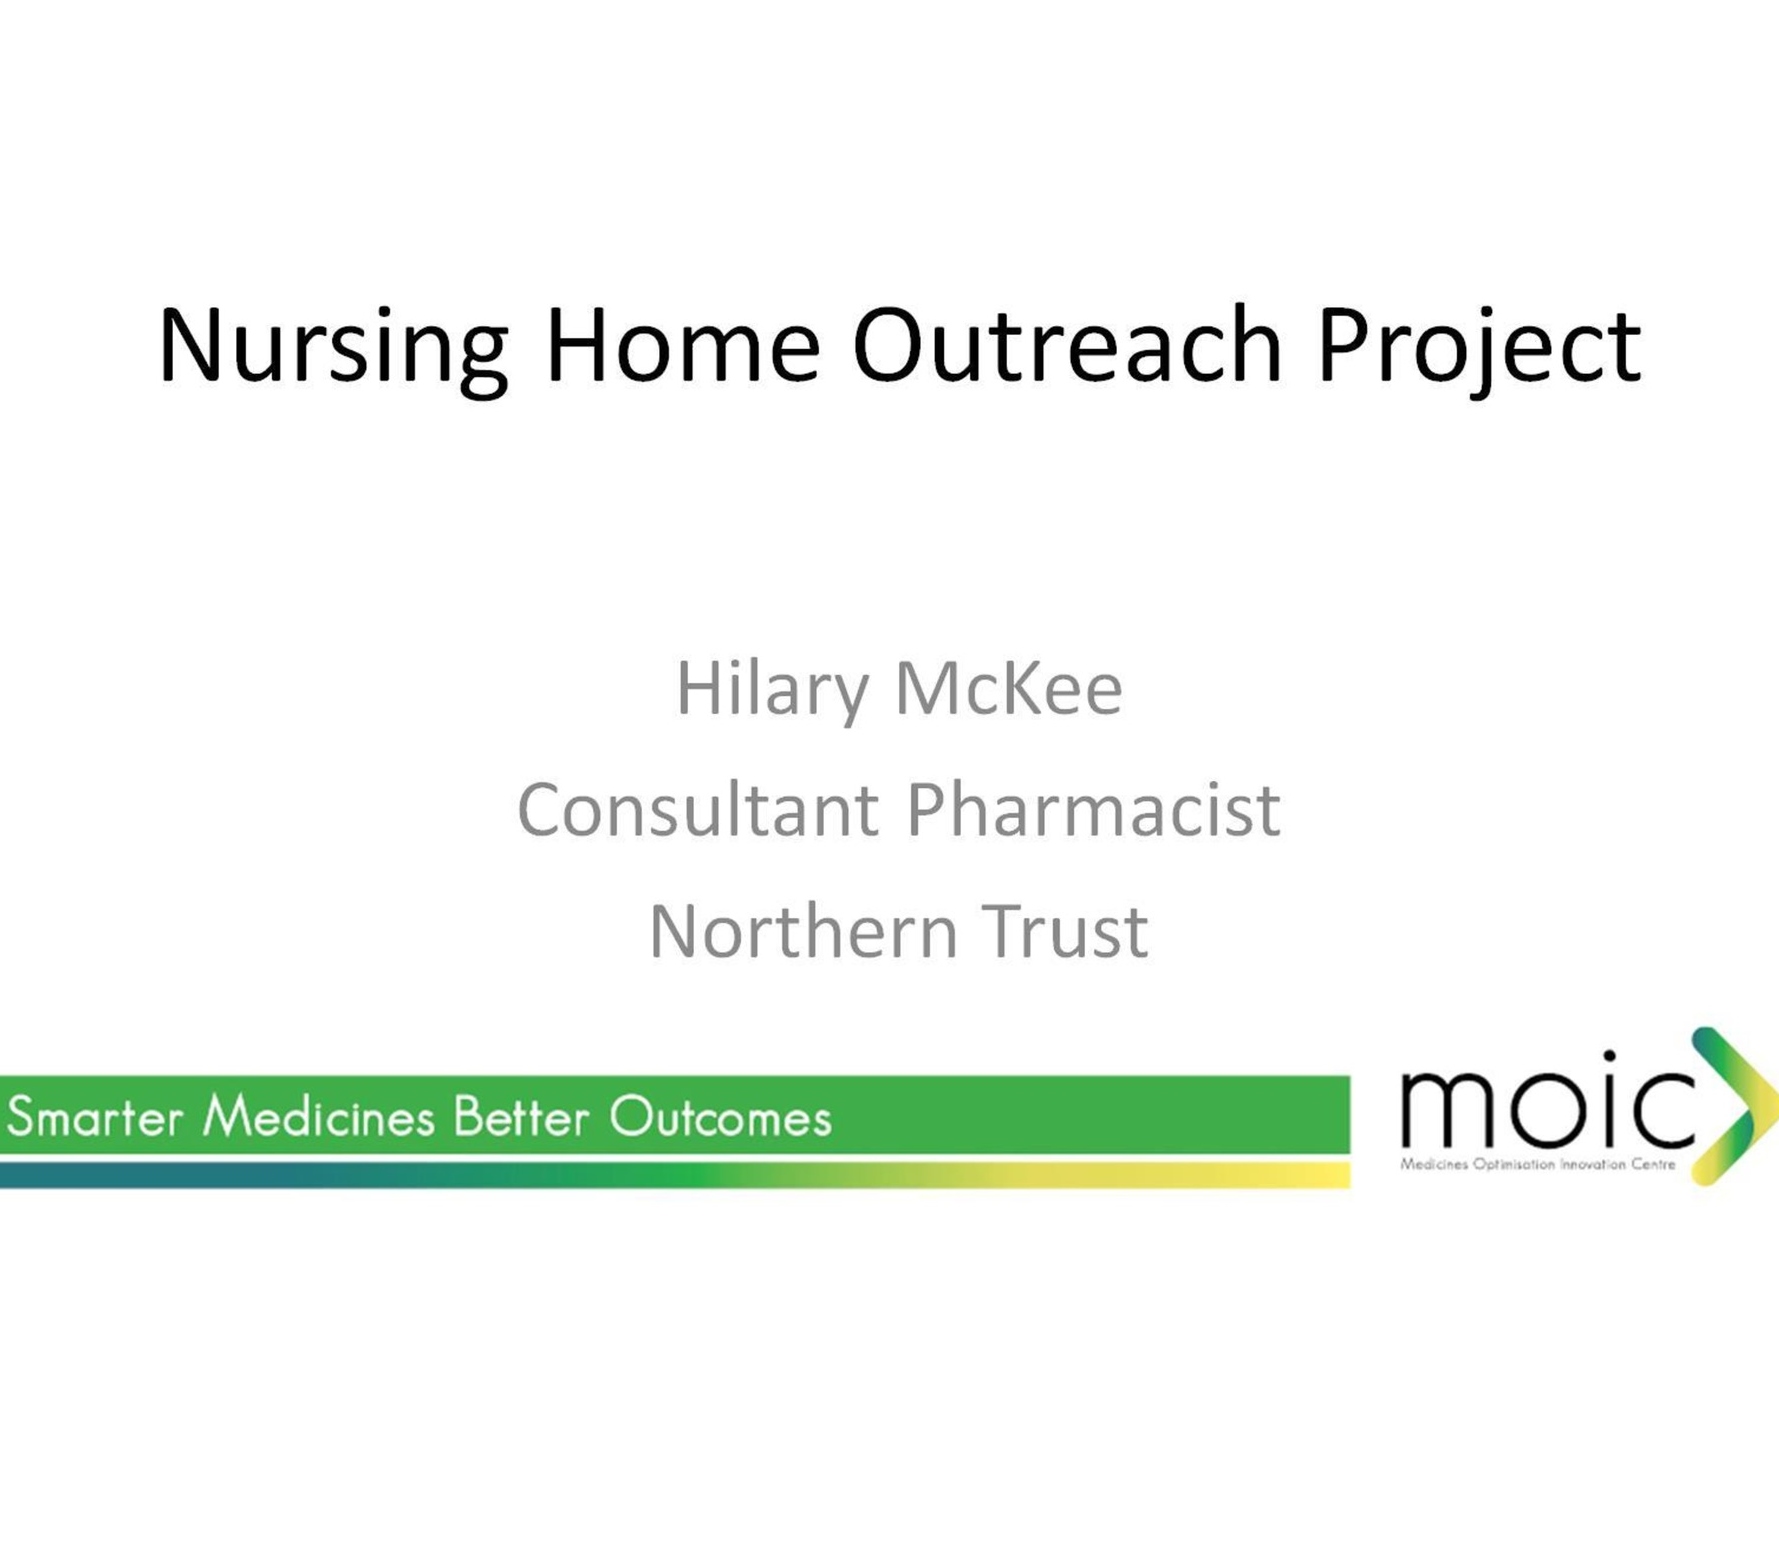 MOOP Think Tank: Nursing Home Outreach Project